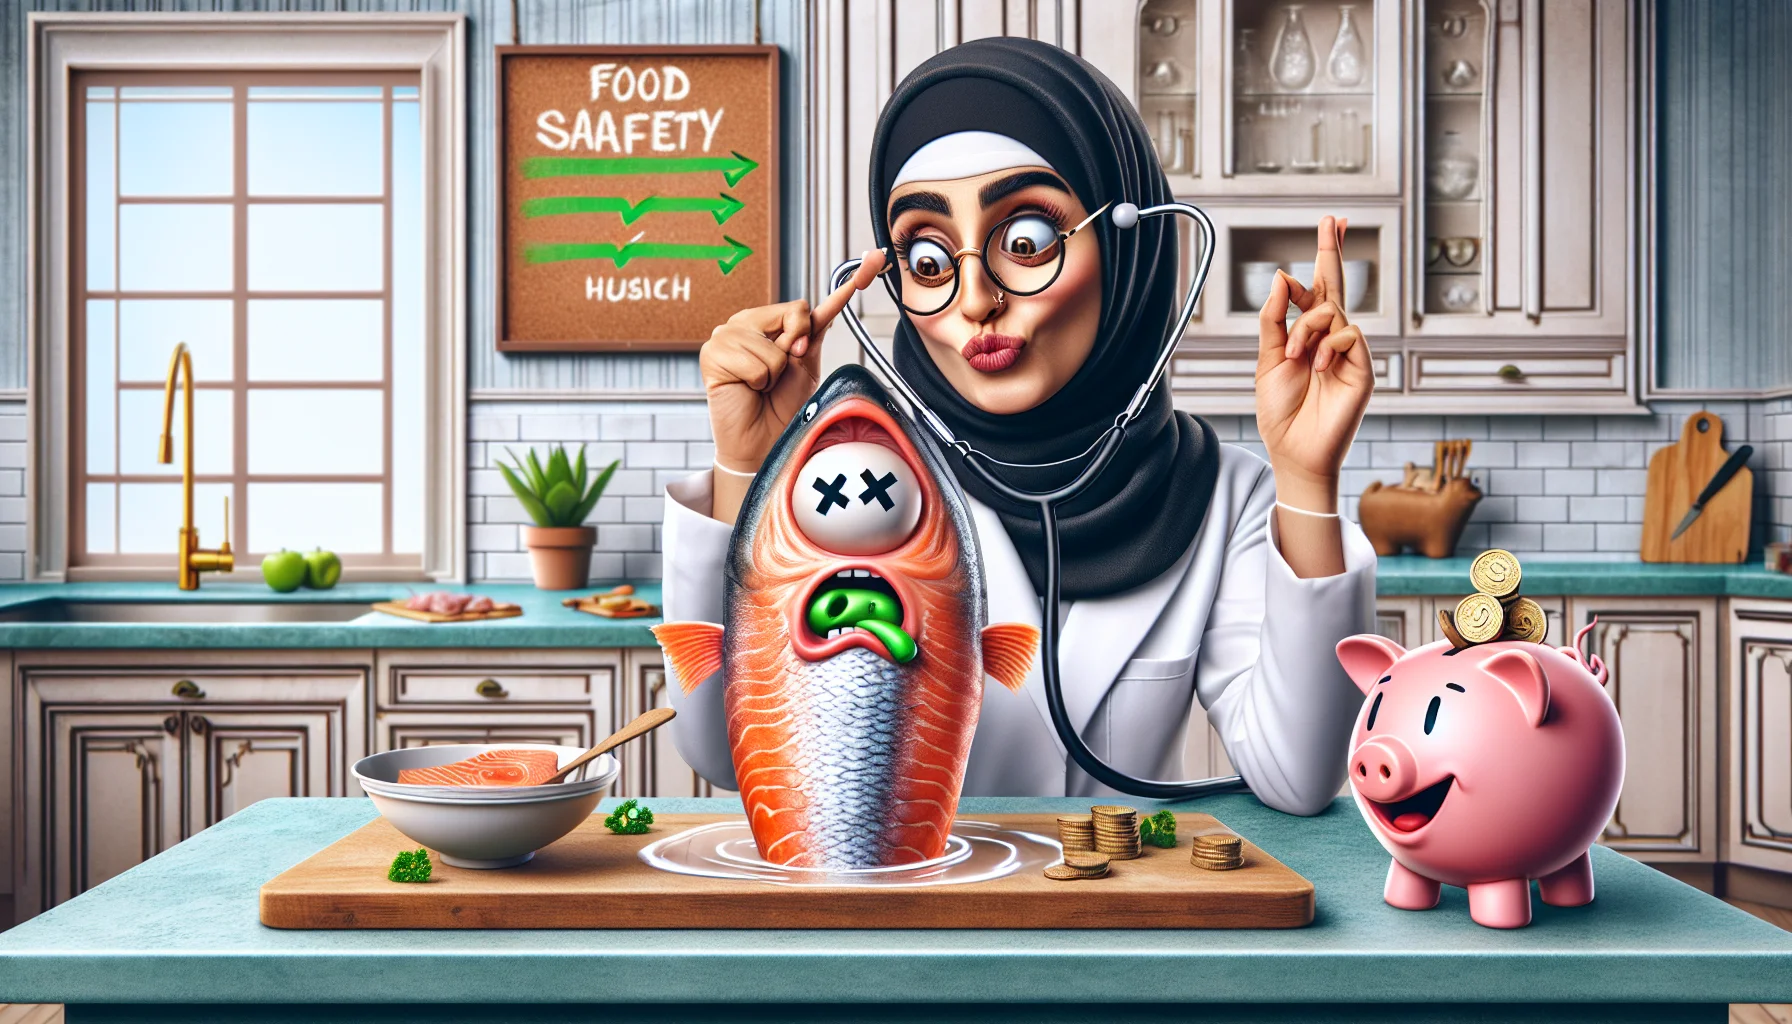 Create an image representing a playful, humorous scene in a beautifully decorated kitchen. In the center, a Middle Eastern woman with a stethoscope around her neck and an expression of shock on her face as she examines a cartoon-style salmon with crossed eyes and a green tongue sticking out, symbolizing that the salmon is bad. Food safety tips are written on a whiteboard in the background, emphasizing the importance of fresh produce. On the corner, a piggy bank with coins spilling out is laughing, symbolizing the savings from eating fresh, healthy foods.